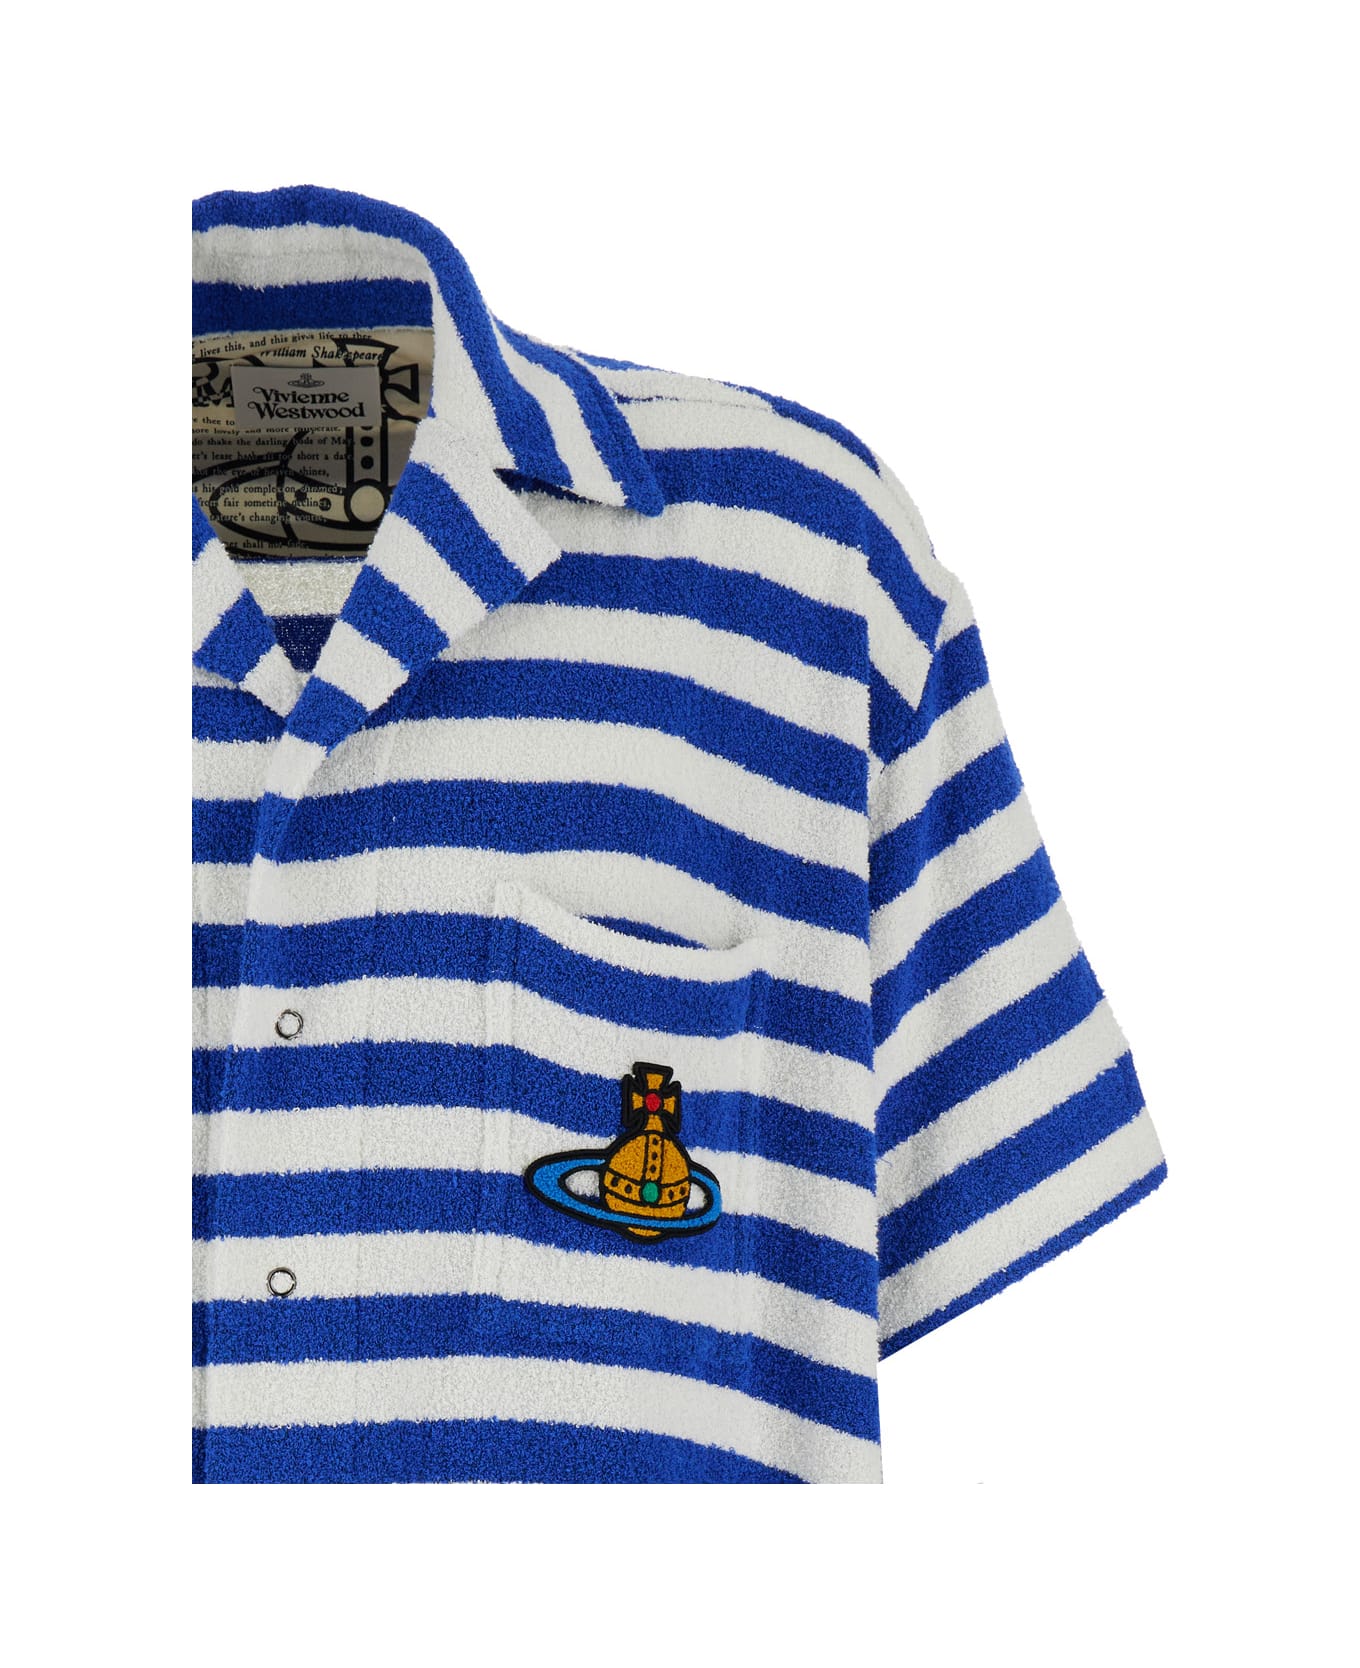 Vivienne Westwood Blue And White Striped Bowling Shirt With Orb Embroidery In Cotton Blend Man - Blu シャツ